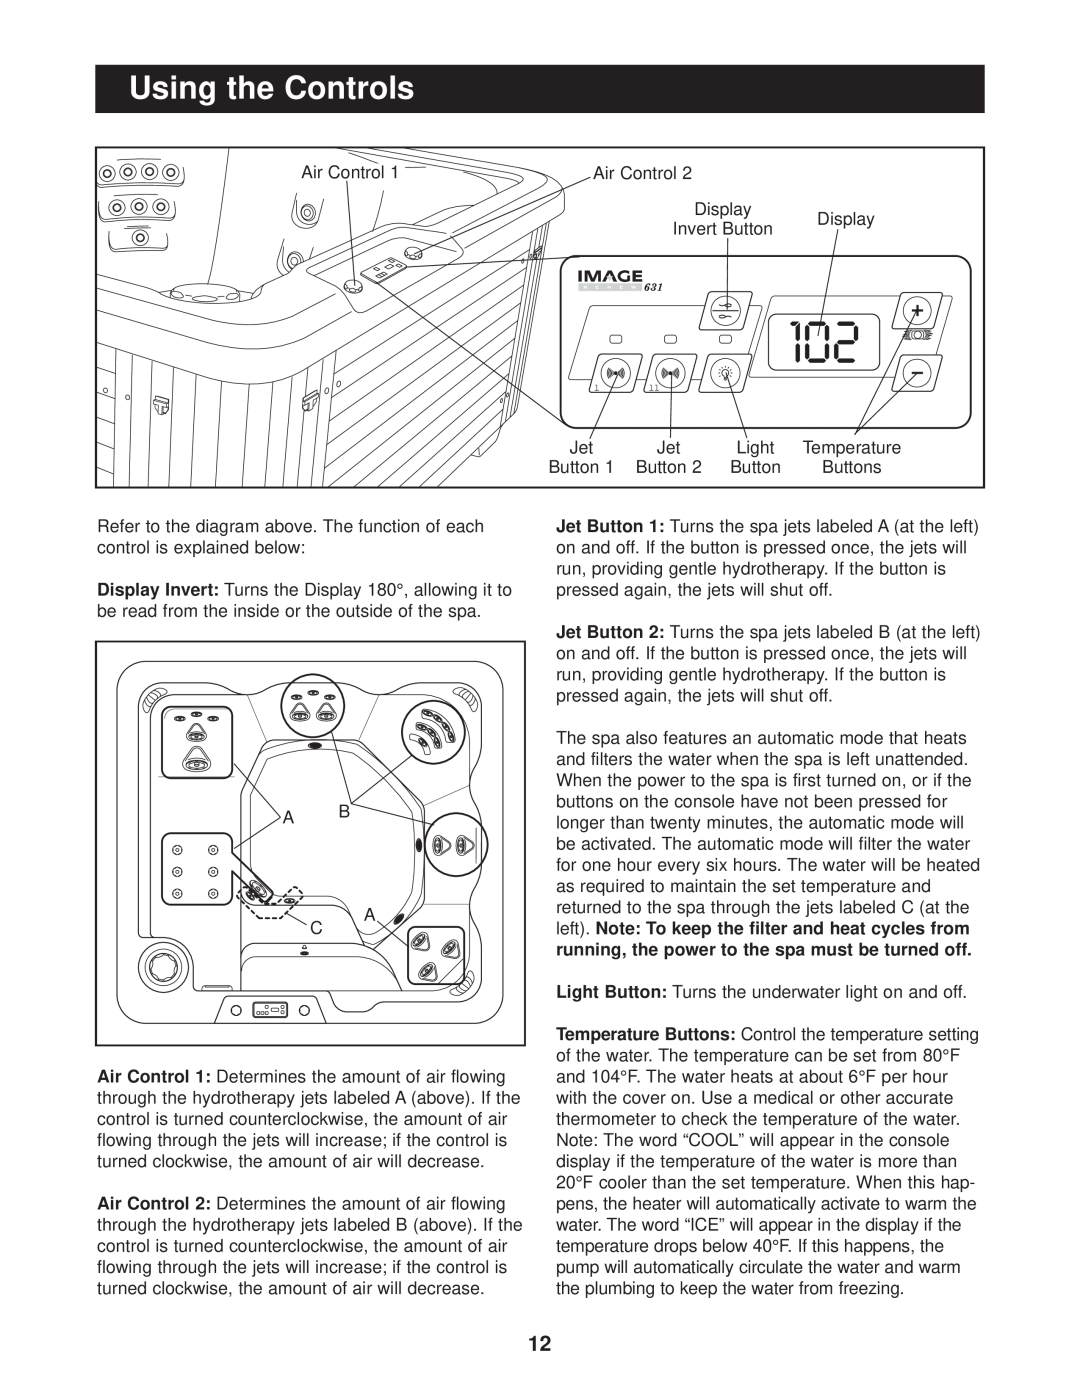 Image IMHS63100 user manual Using the Controls 